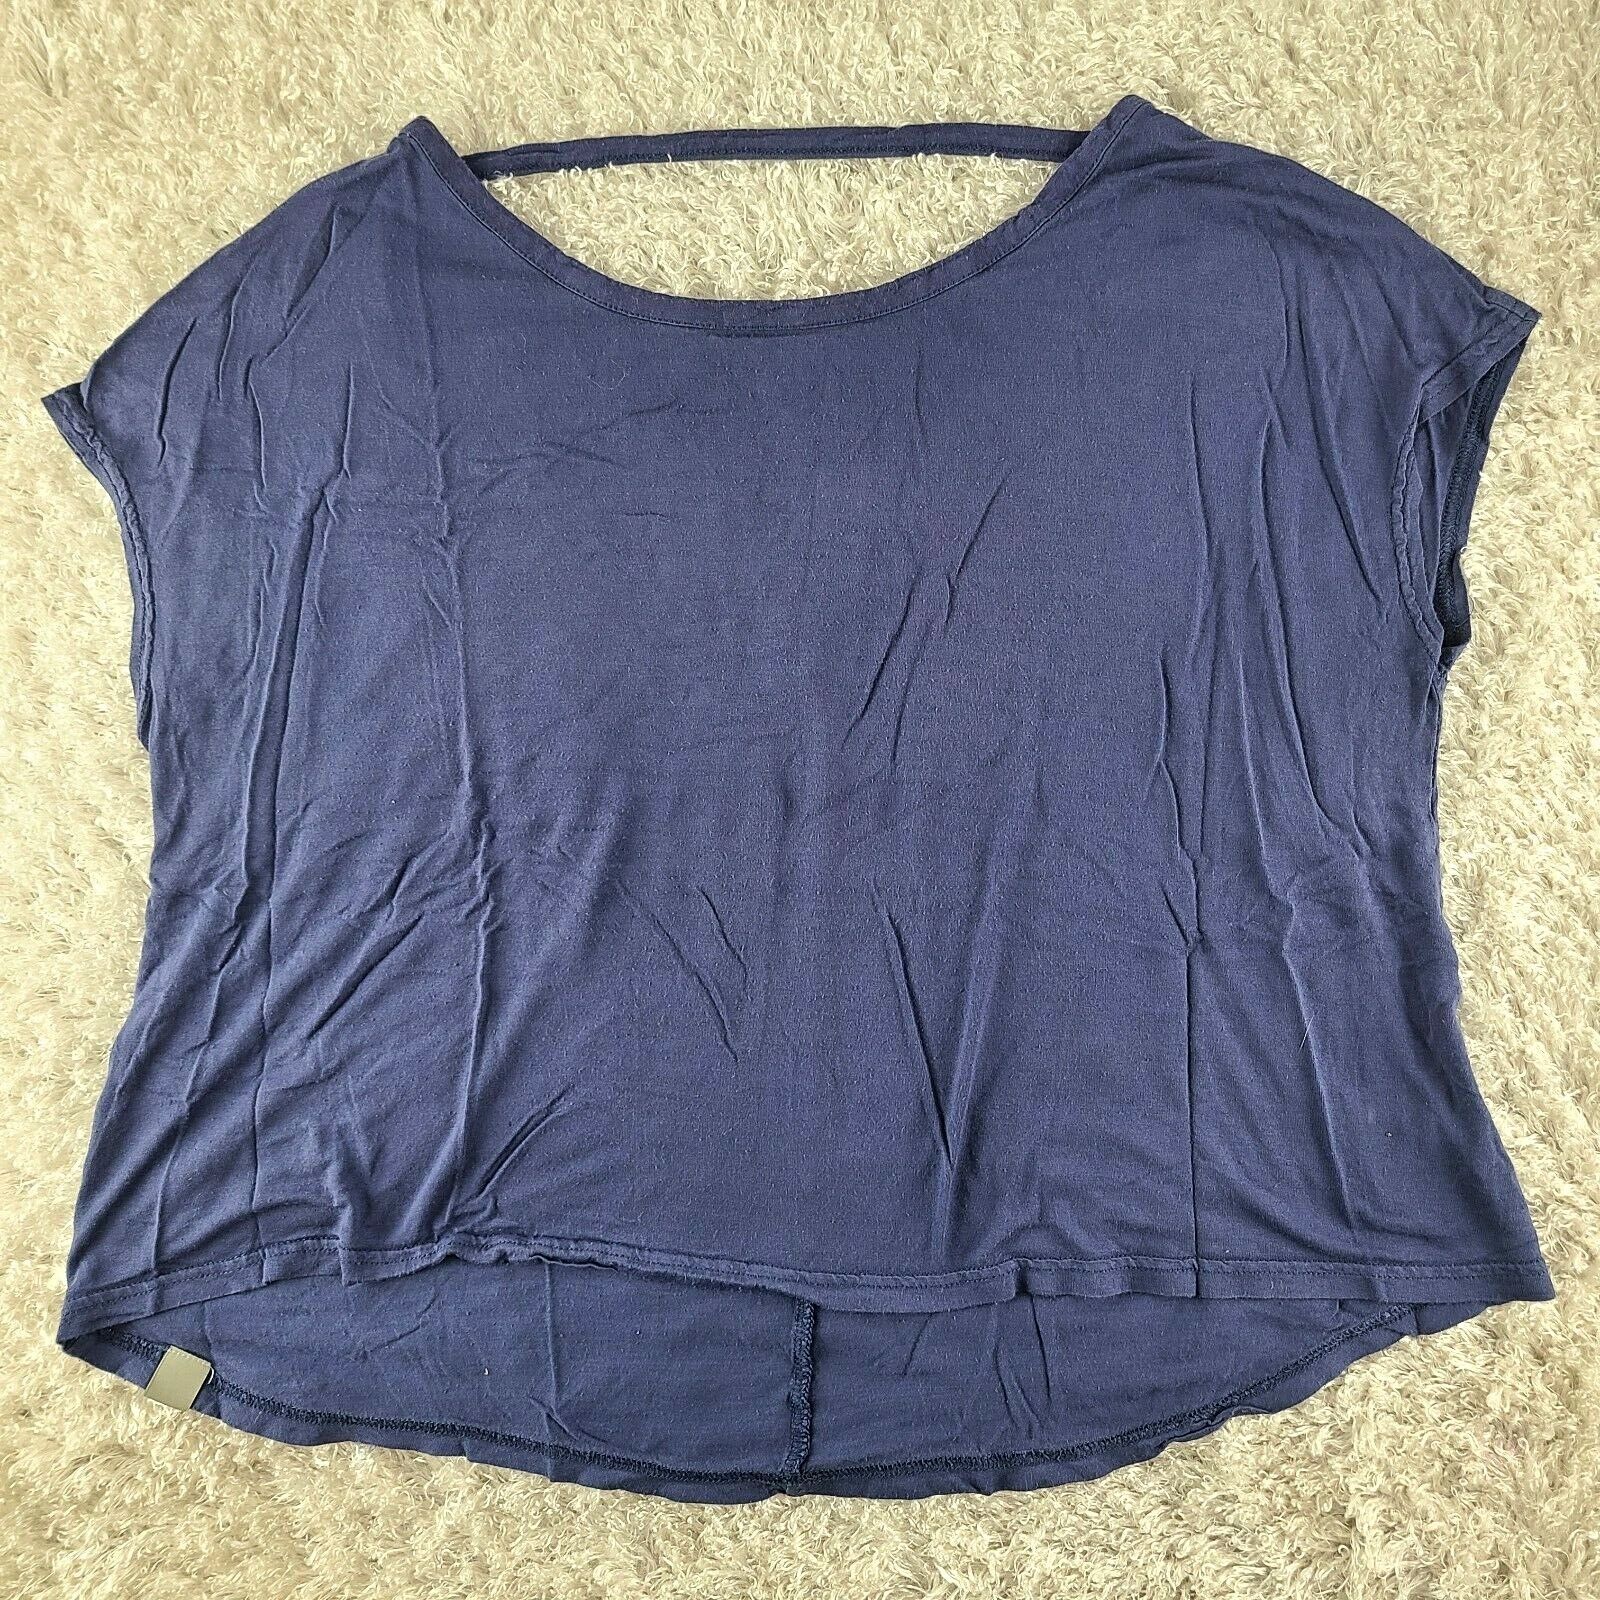 Bench blue popover top SIZE M athletic t-shirt high low hem (R)